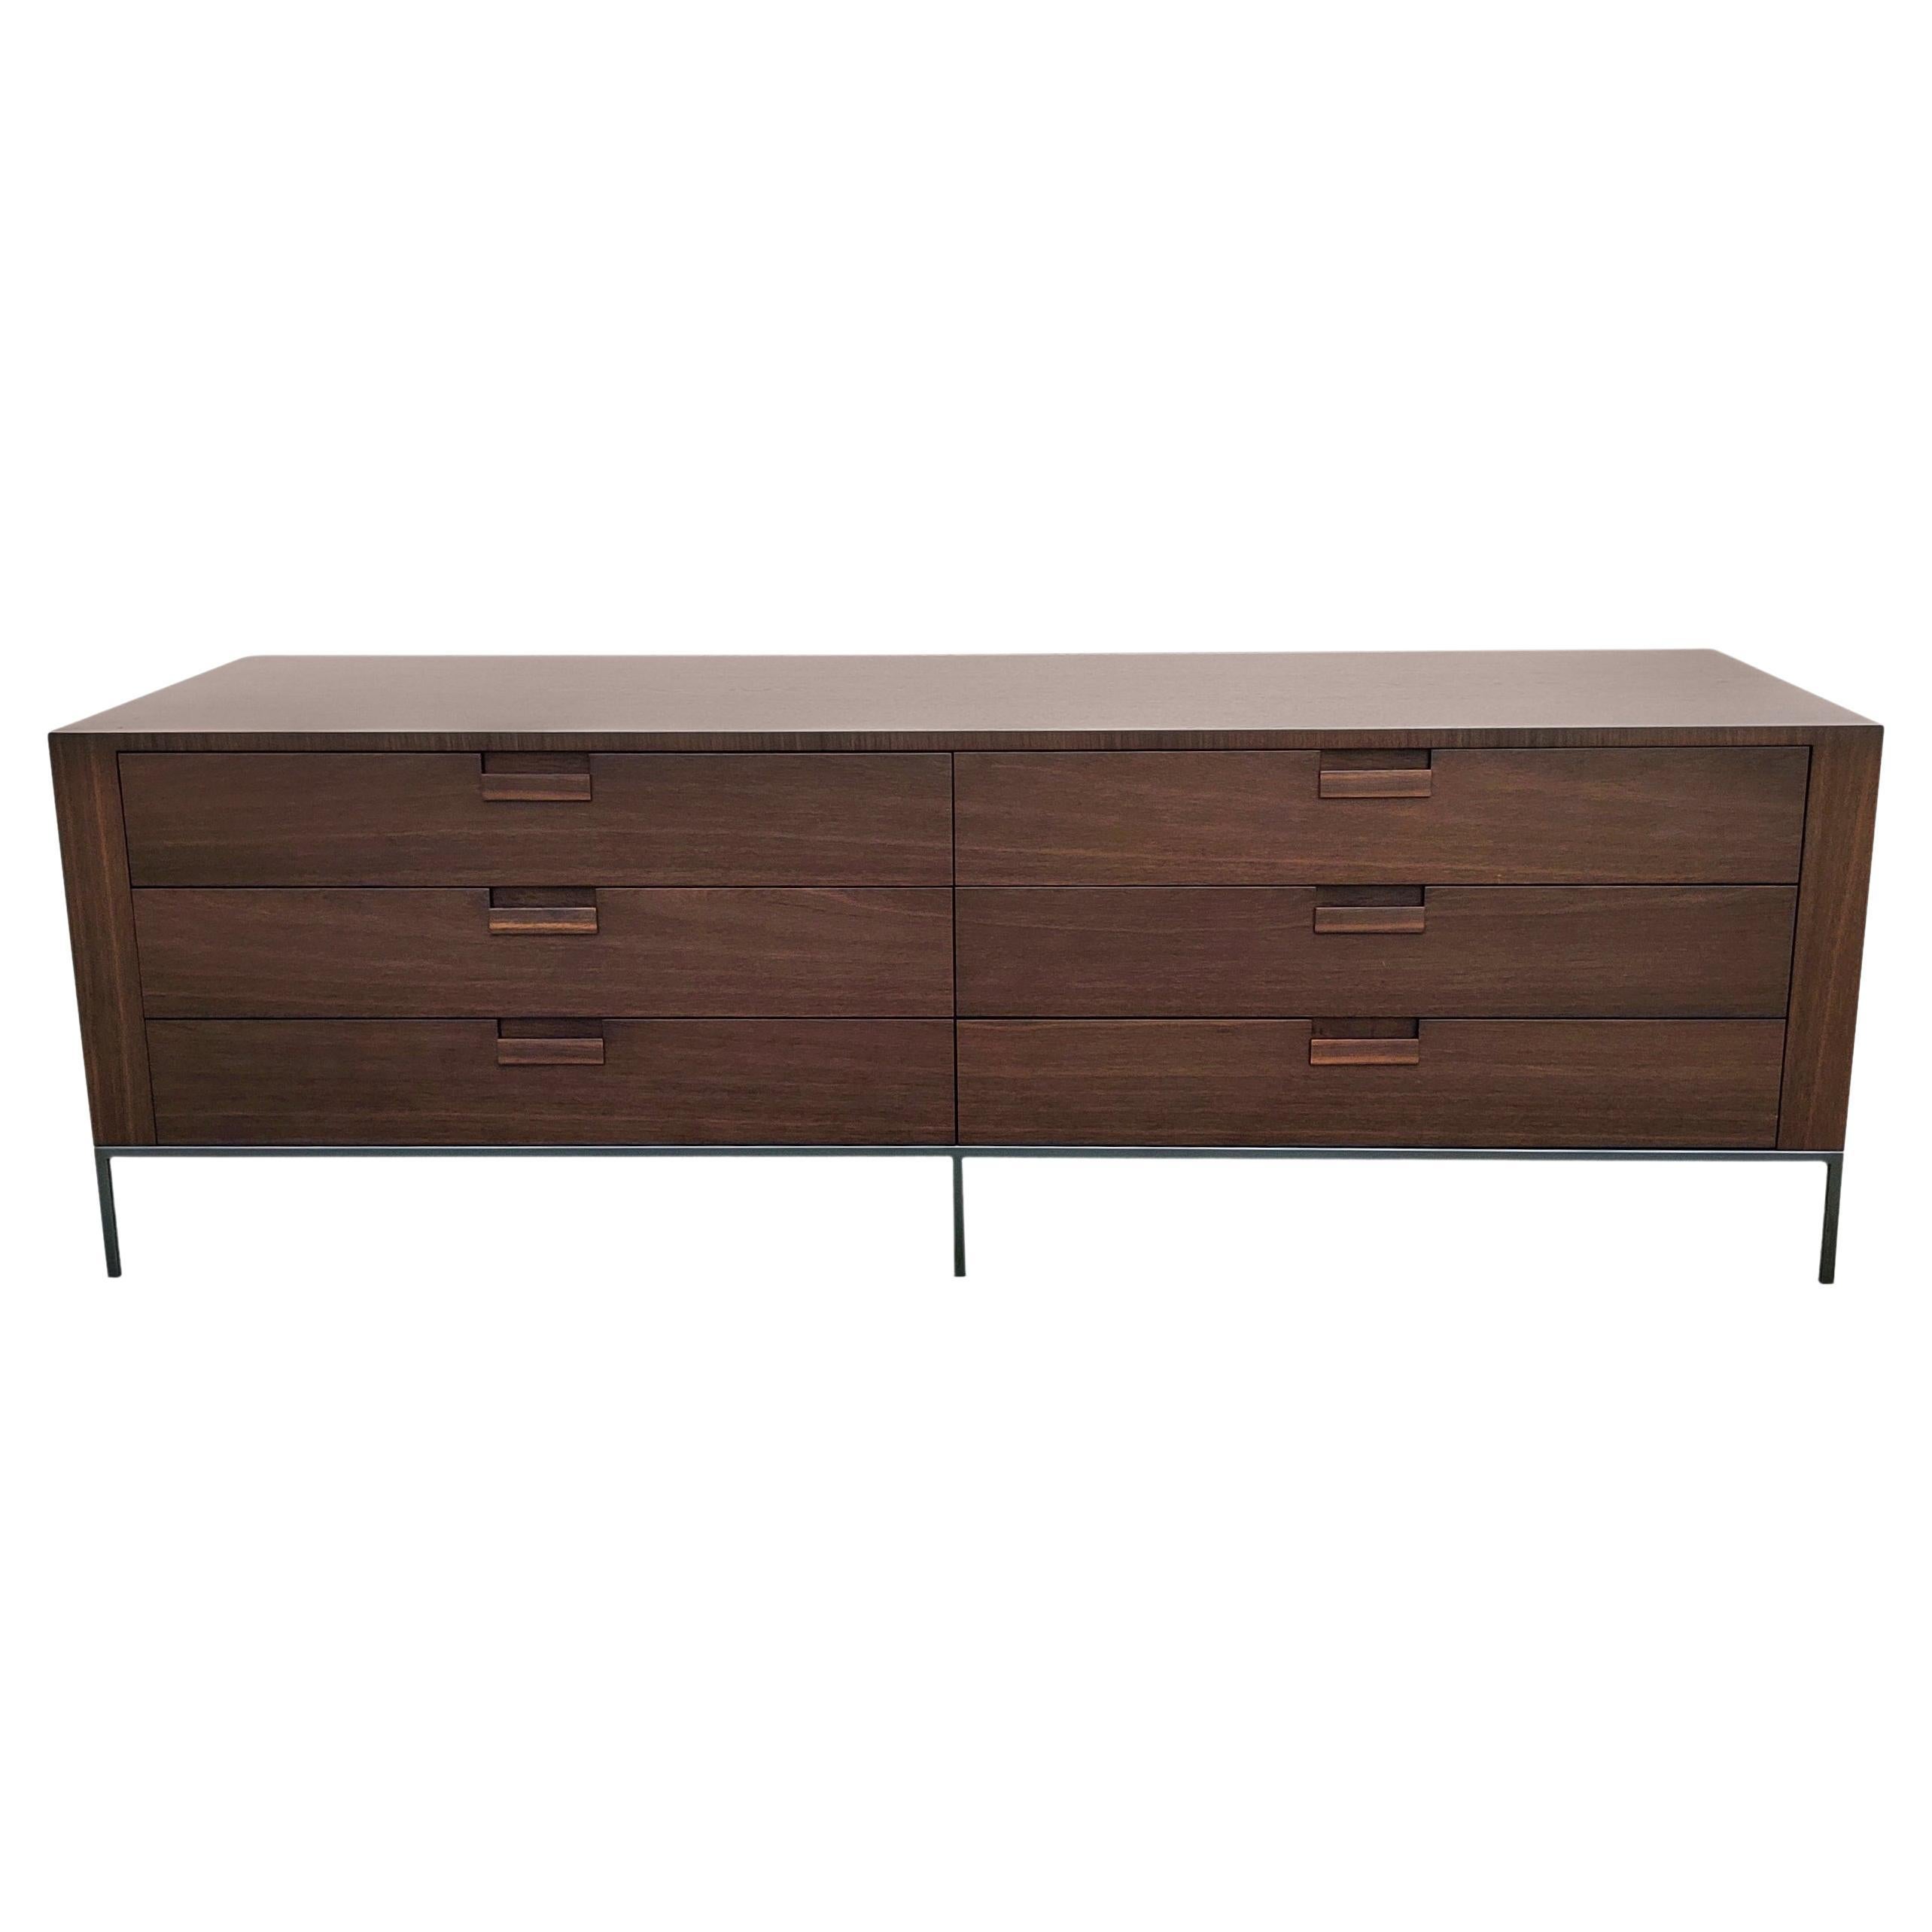 Description: A generously sized six-drawer dresser or storage cabinet in beautiful and exotic wenge. Has wenge handles. The interior of all drawers is also finished in wenge. This sleek and stylish dresser or cabinet is long, low and contemporary!